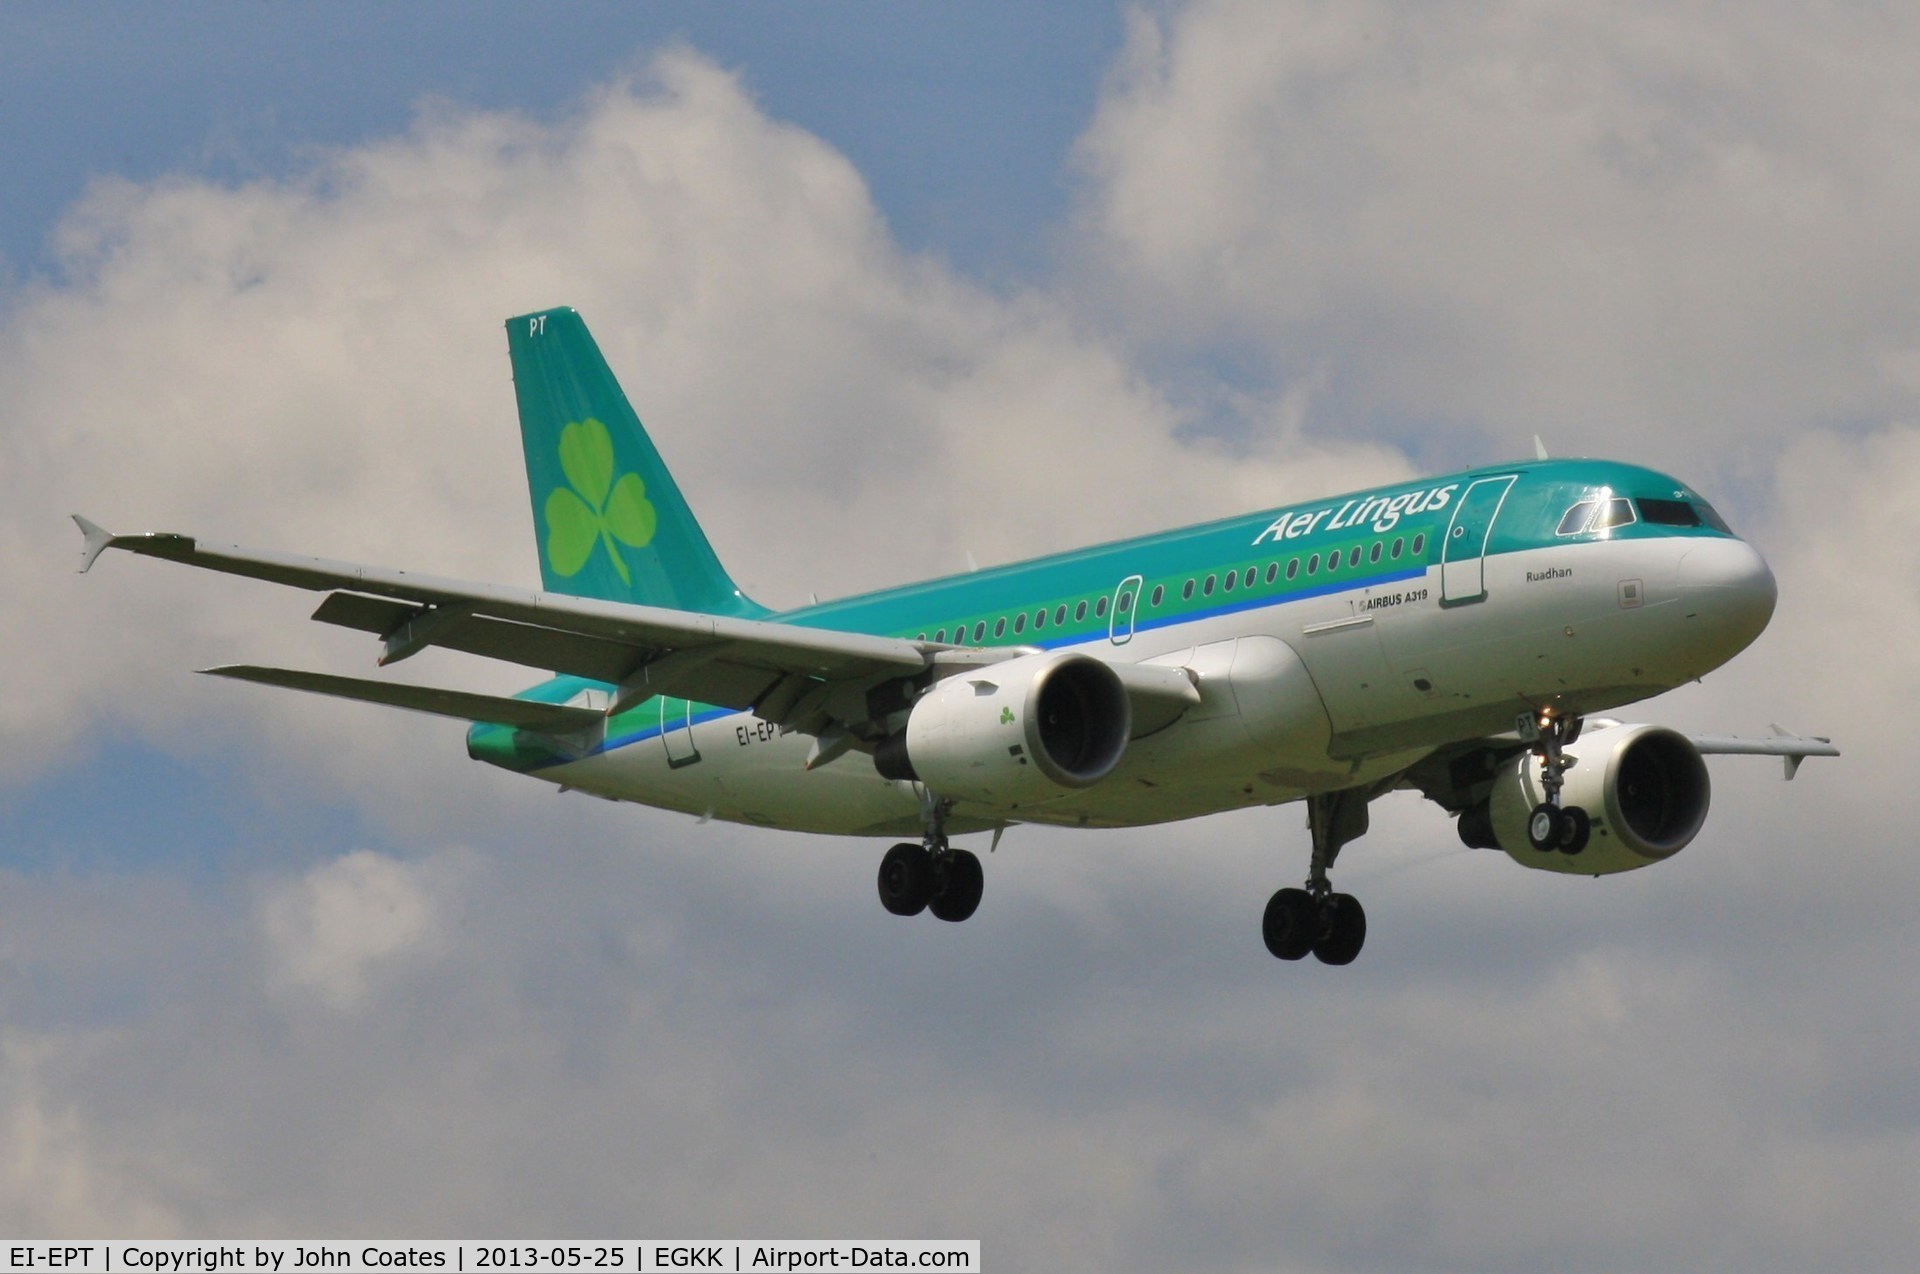 EI-EPT, 2007 Airbus A319-111 C/N 3054, Finals to 08R